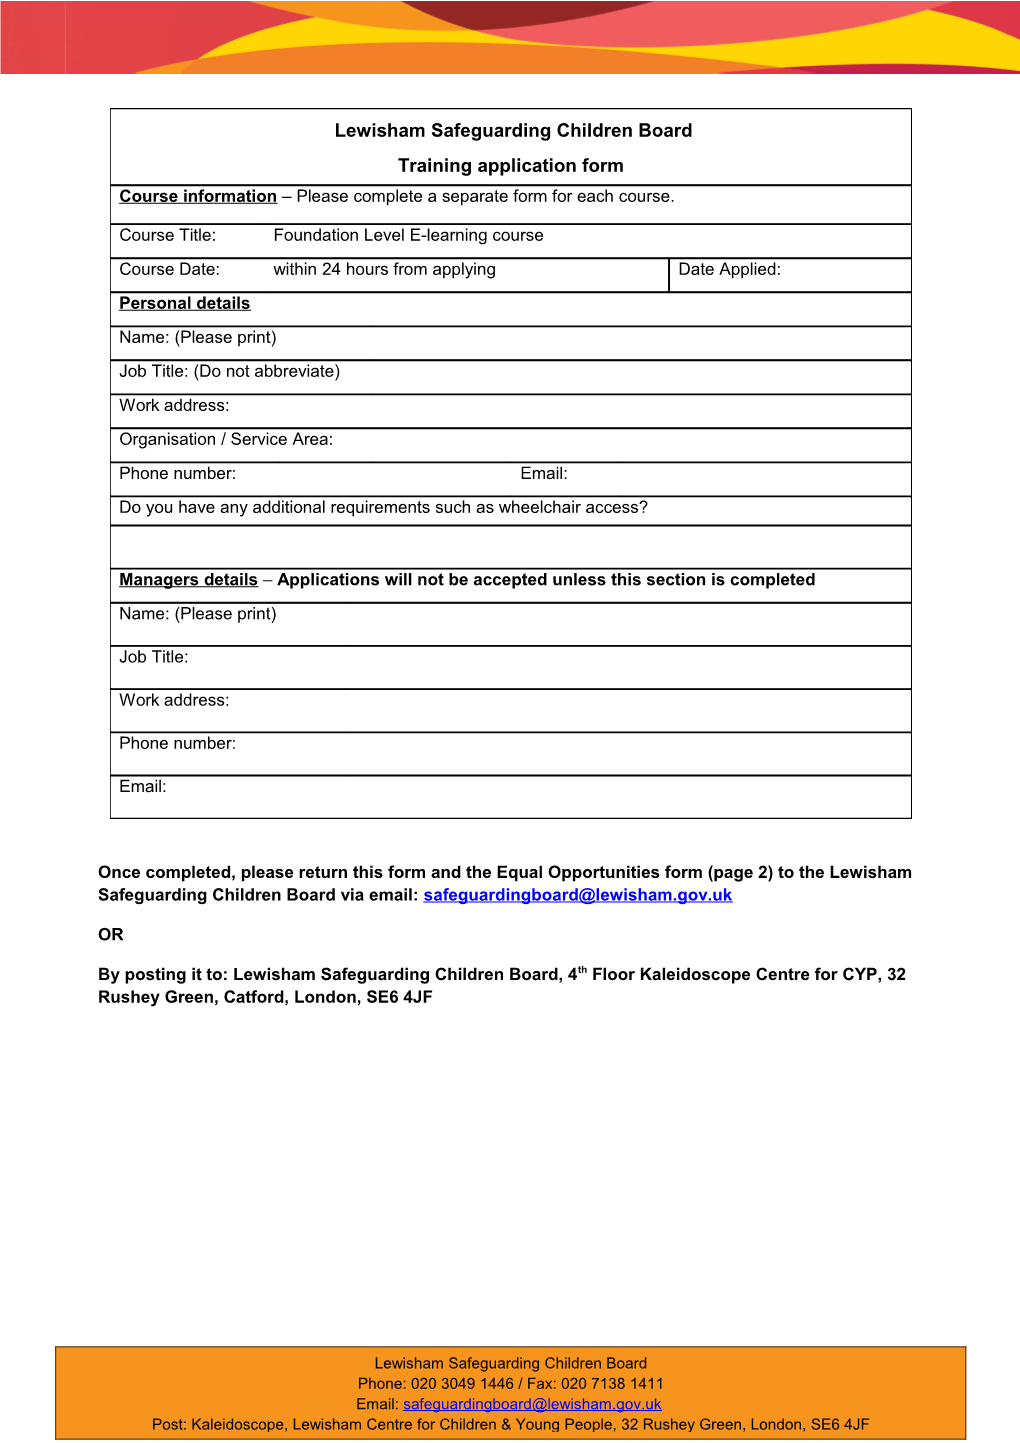 Once Completed, Please Return This Form and the Equal Opportunities Form (Page 2) to The